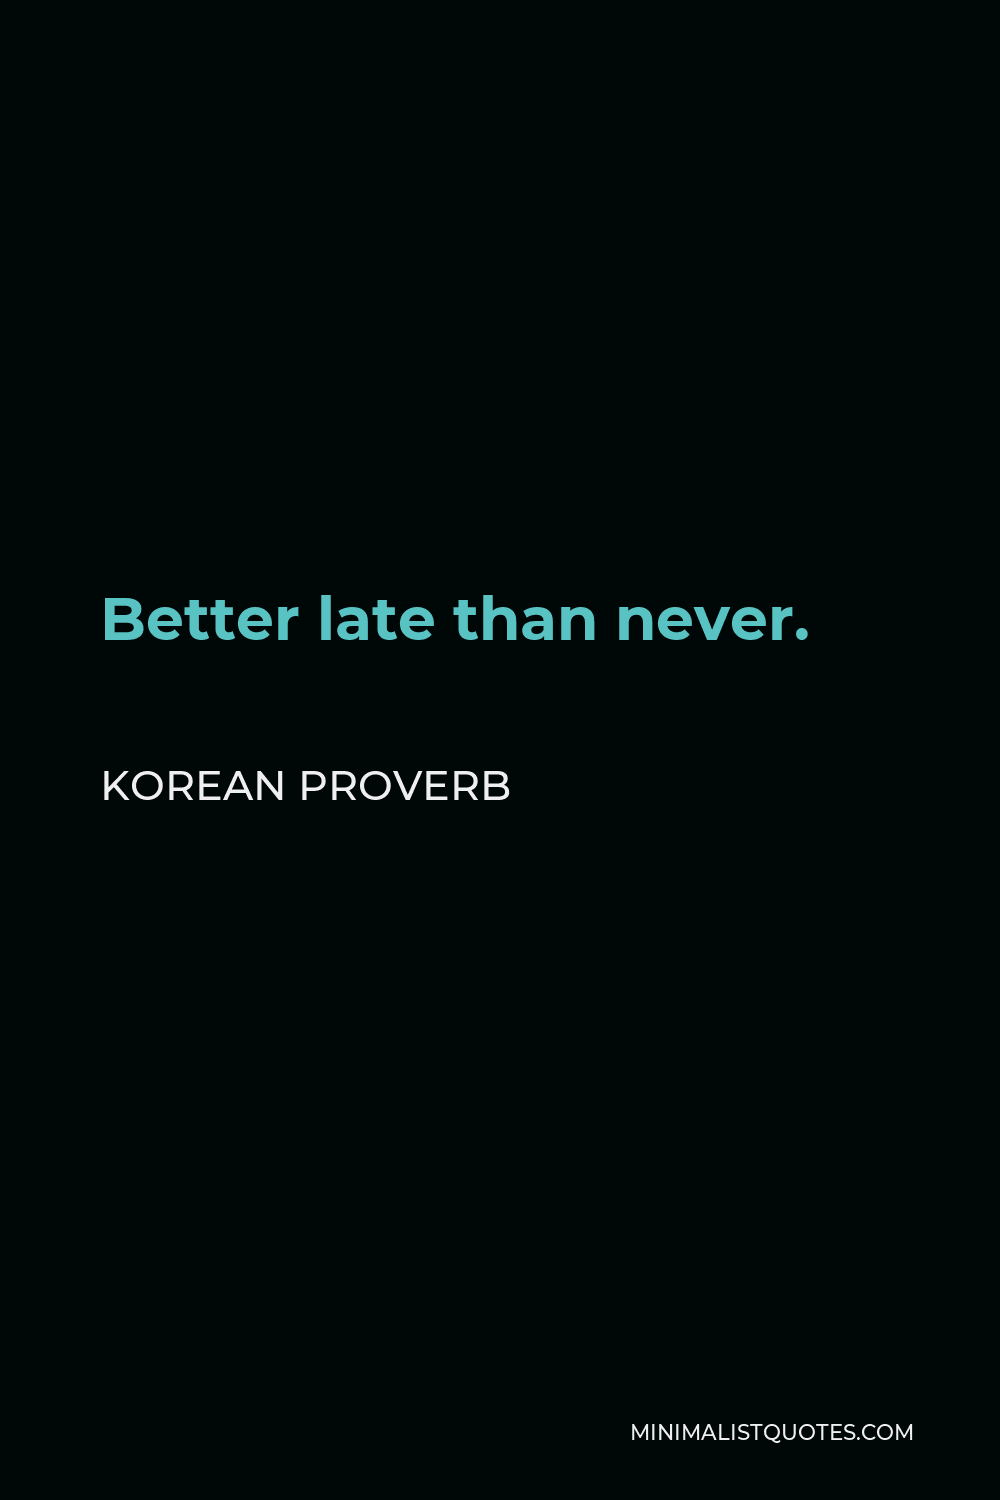 Korean Proverb Quote - Better late than never.